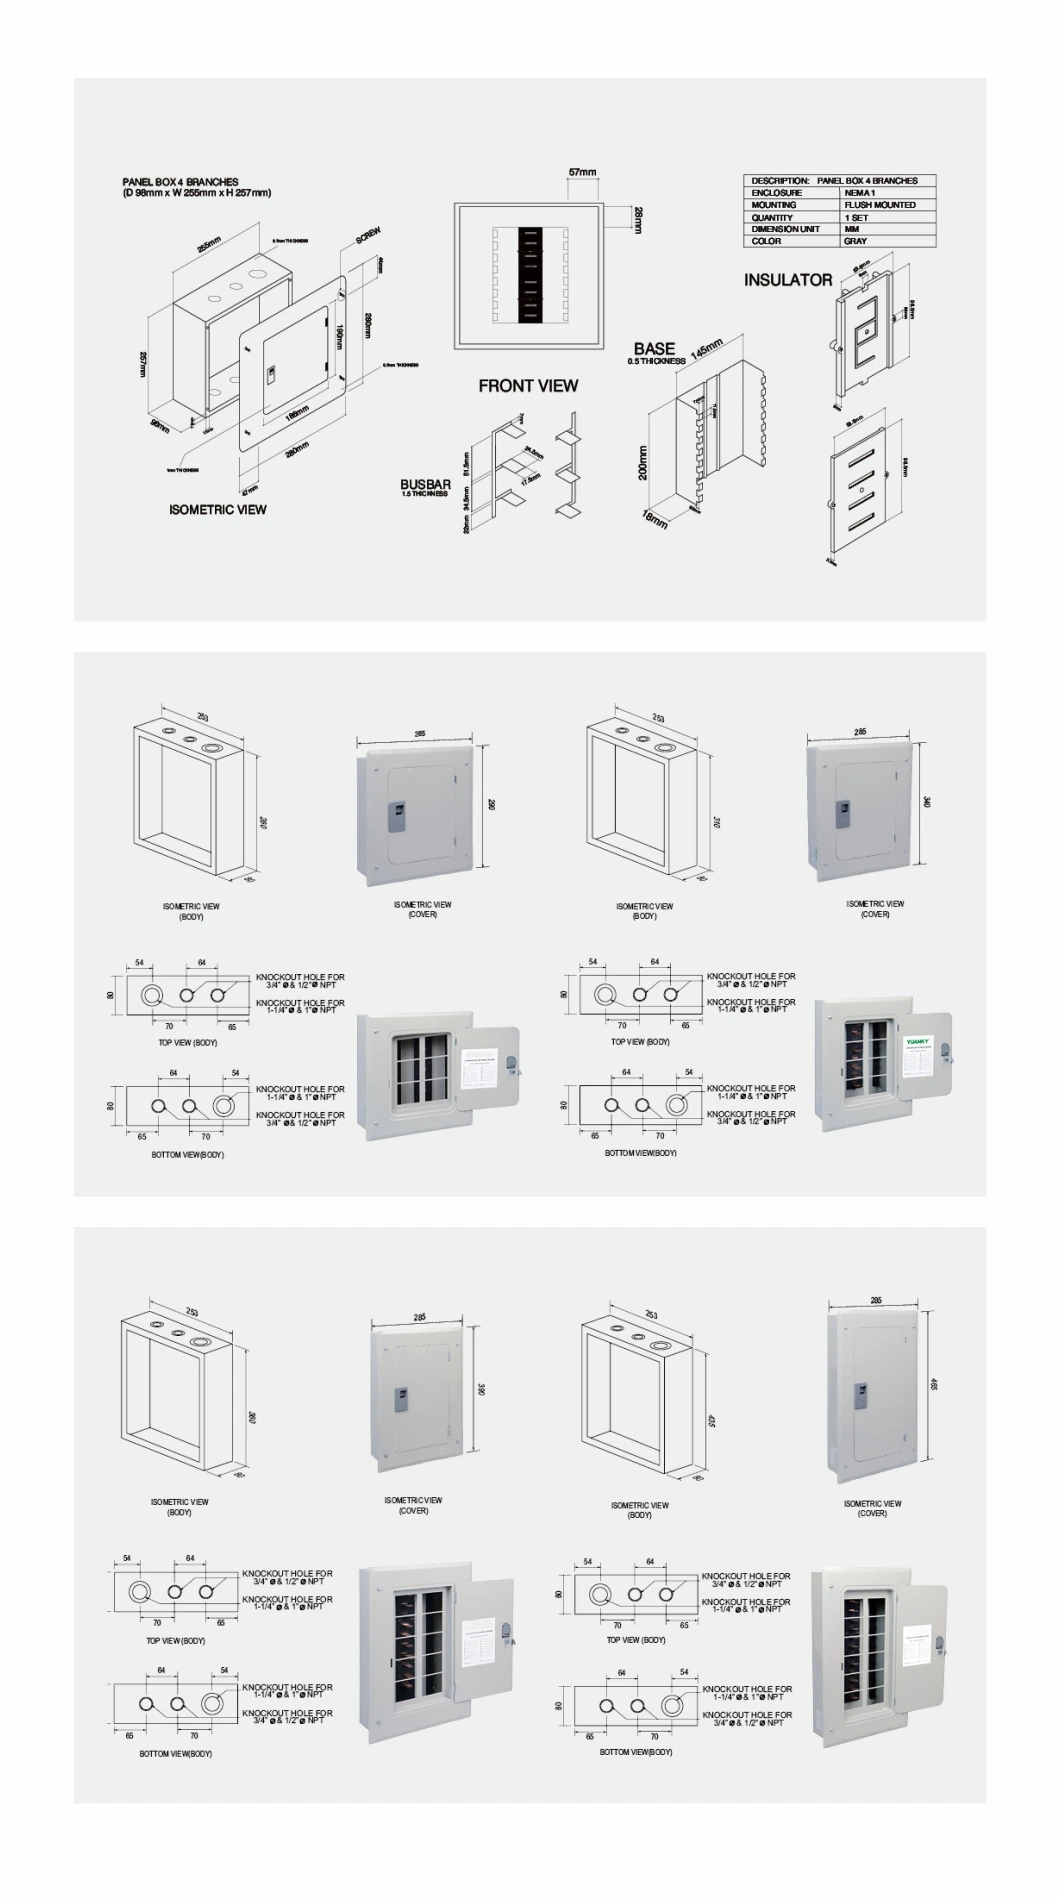 4way Single Phase Domestic Residnetial Commercial Load Center Distribution Box Electrical Panel Board